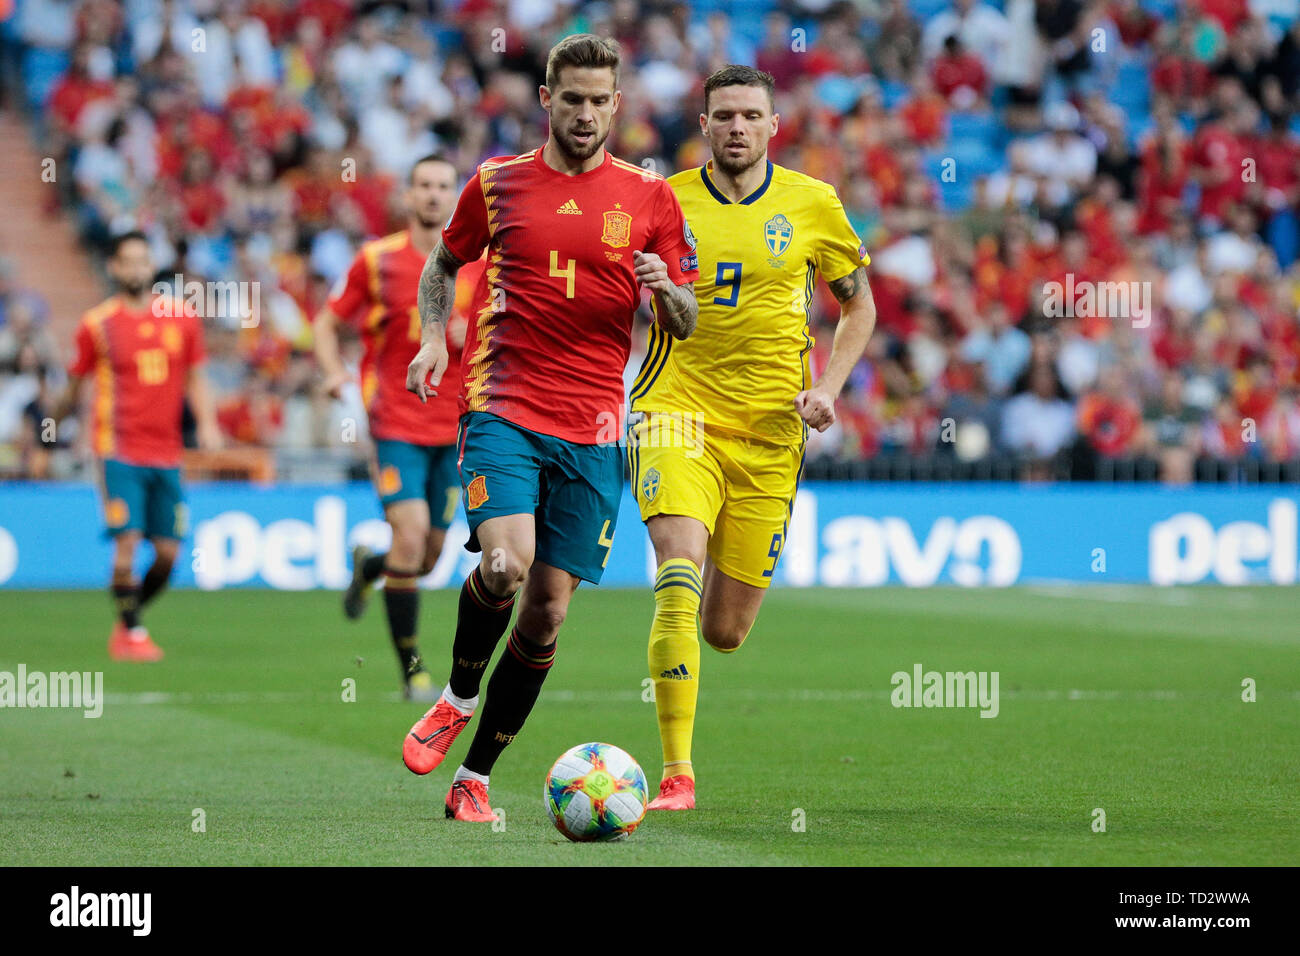 Spain national team player Inigo Martinez and Sweden national team player Marcus Berg seen in action during the UEFA EURO 2020 Qualifier match between Spain and Sweden at Santiago Bernabeu Stadium in Madrid. Final score: Spain 3 - Sweden 0 Stock Photo